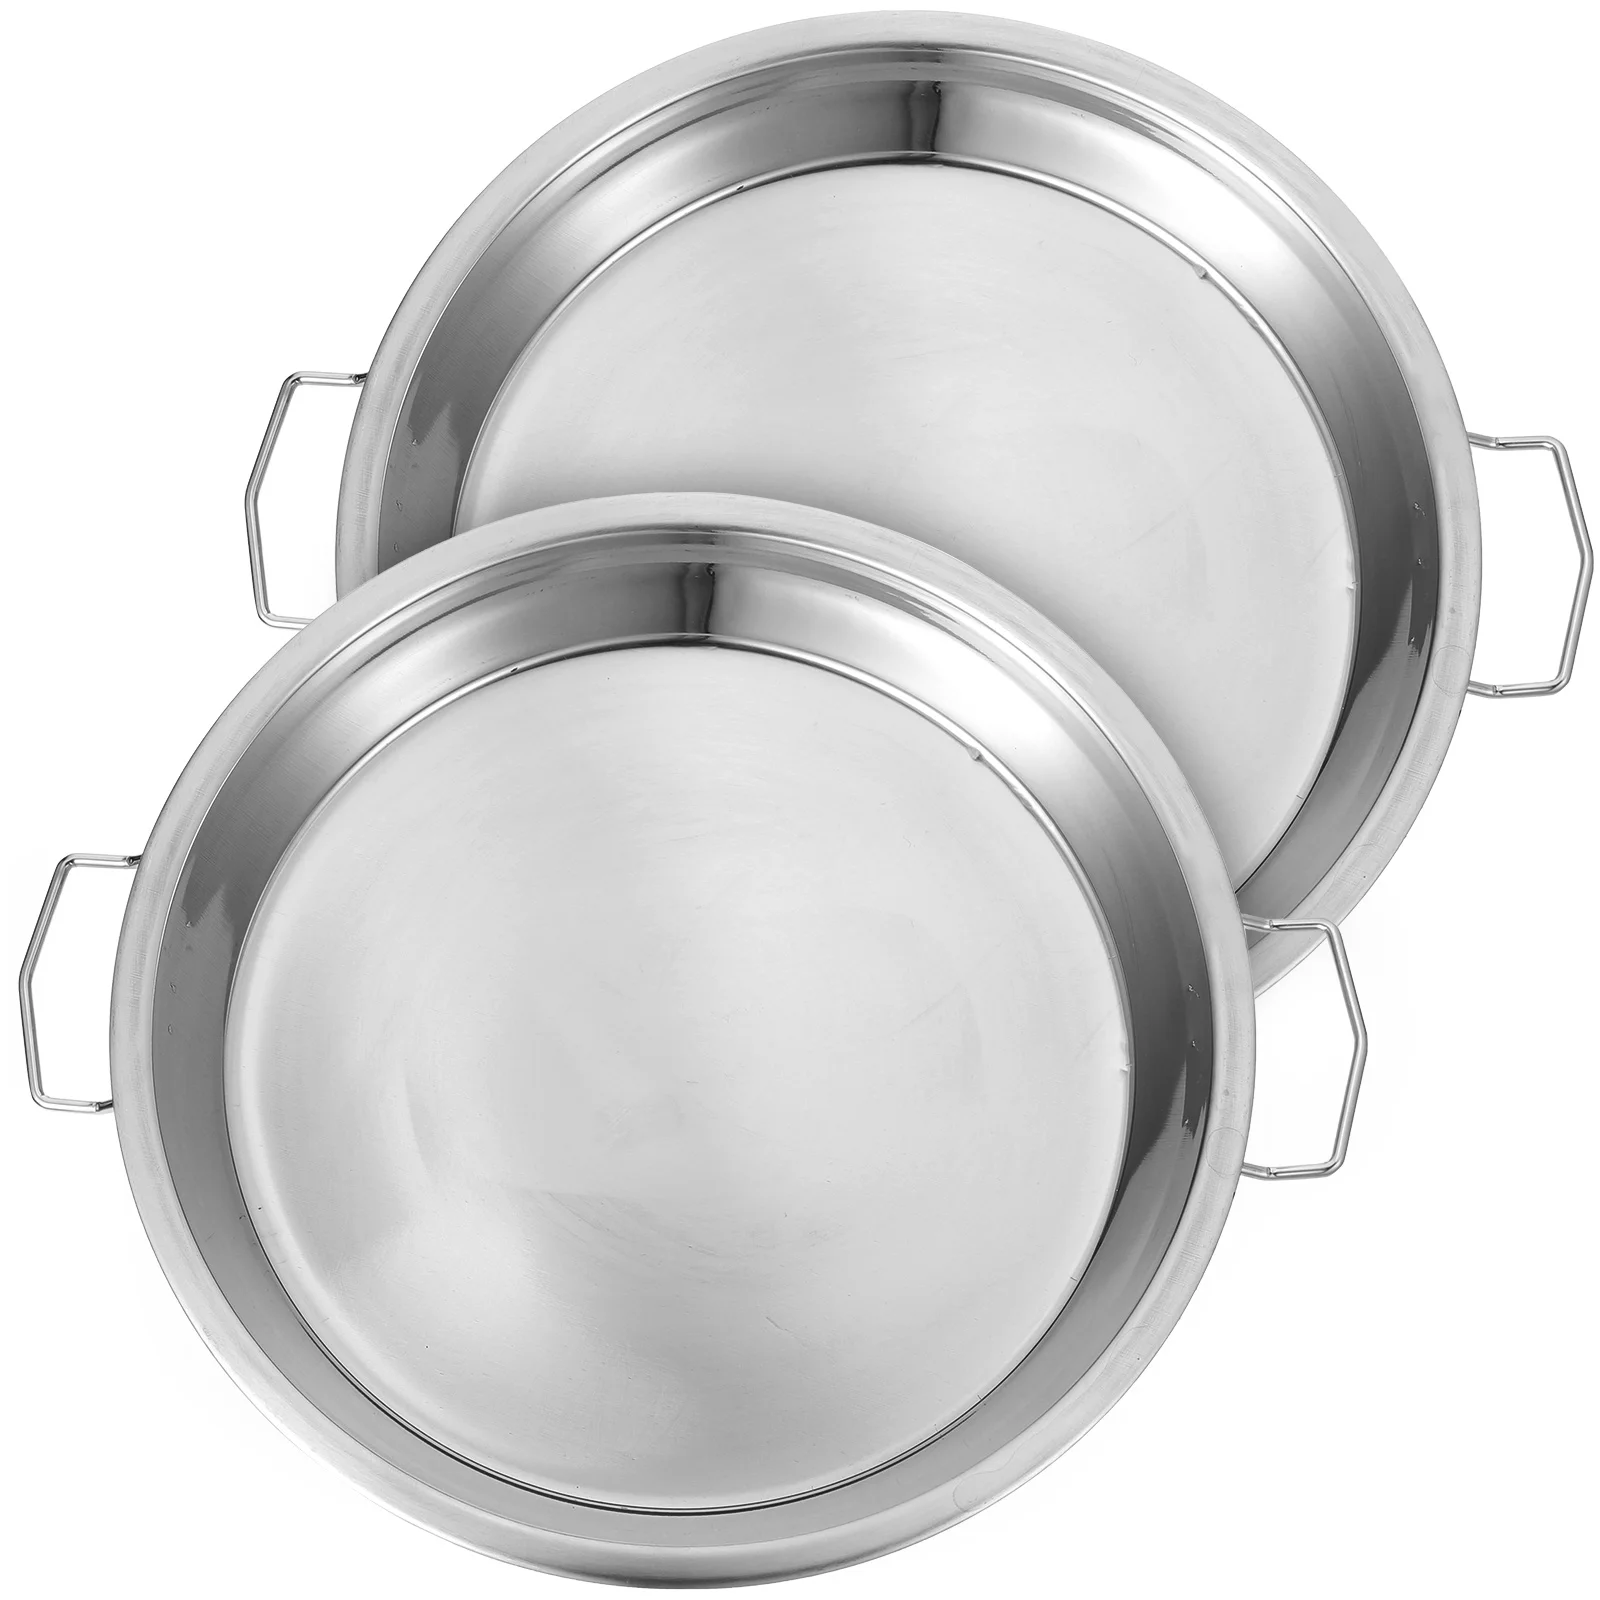 

2 Pcs Salad Bowl Stainless Steel Cooking Utensil Steamed Rice Plate Dish Round Baking Pan Cold Noodle Tray